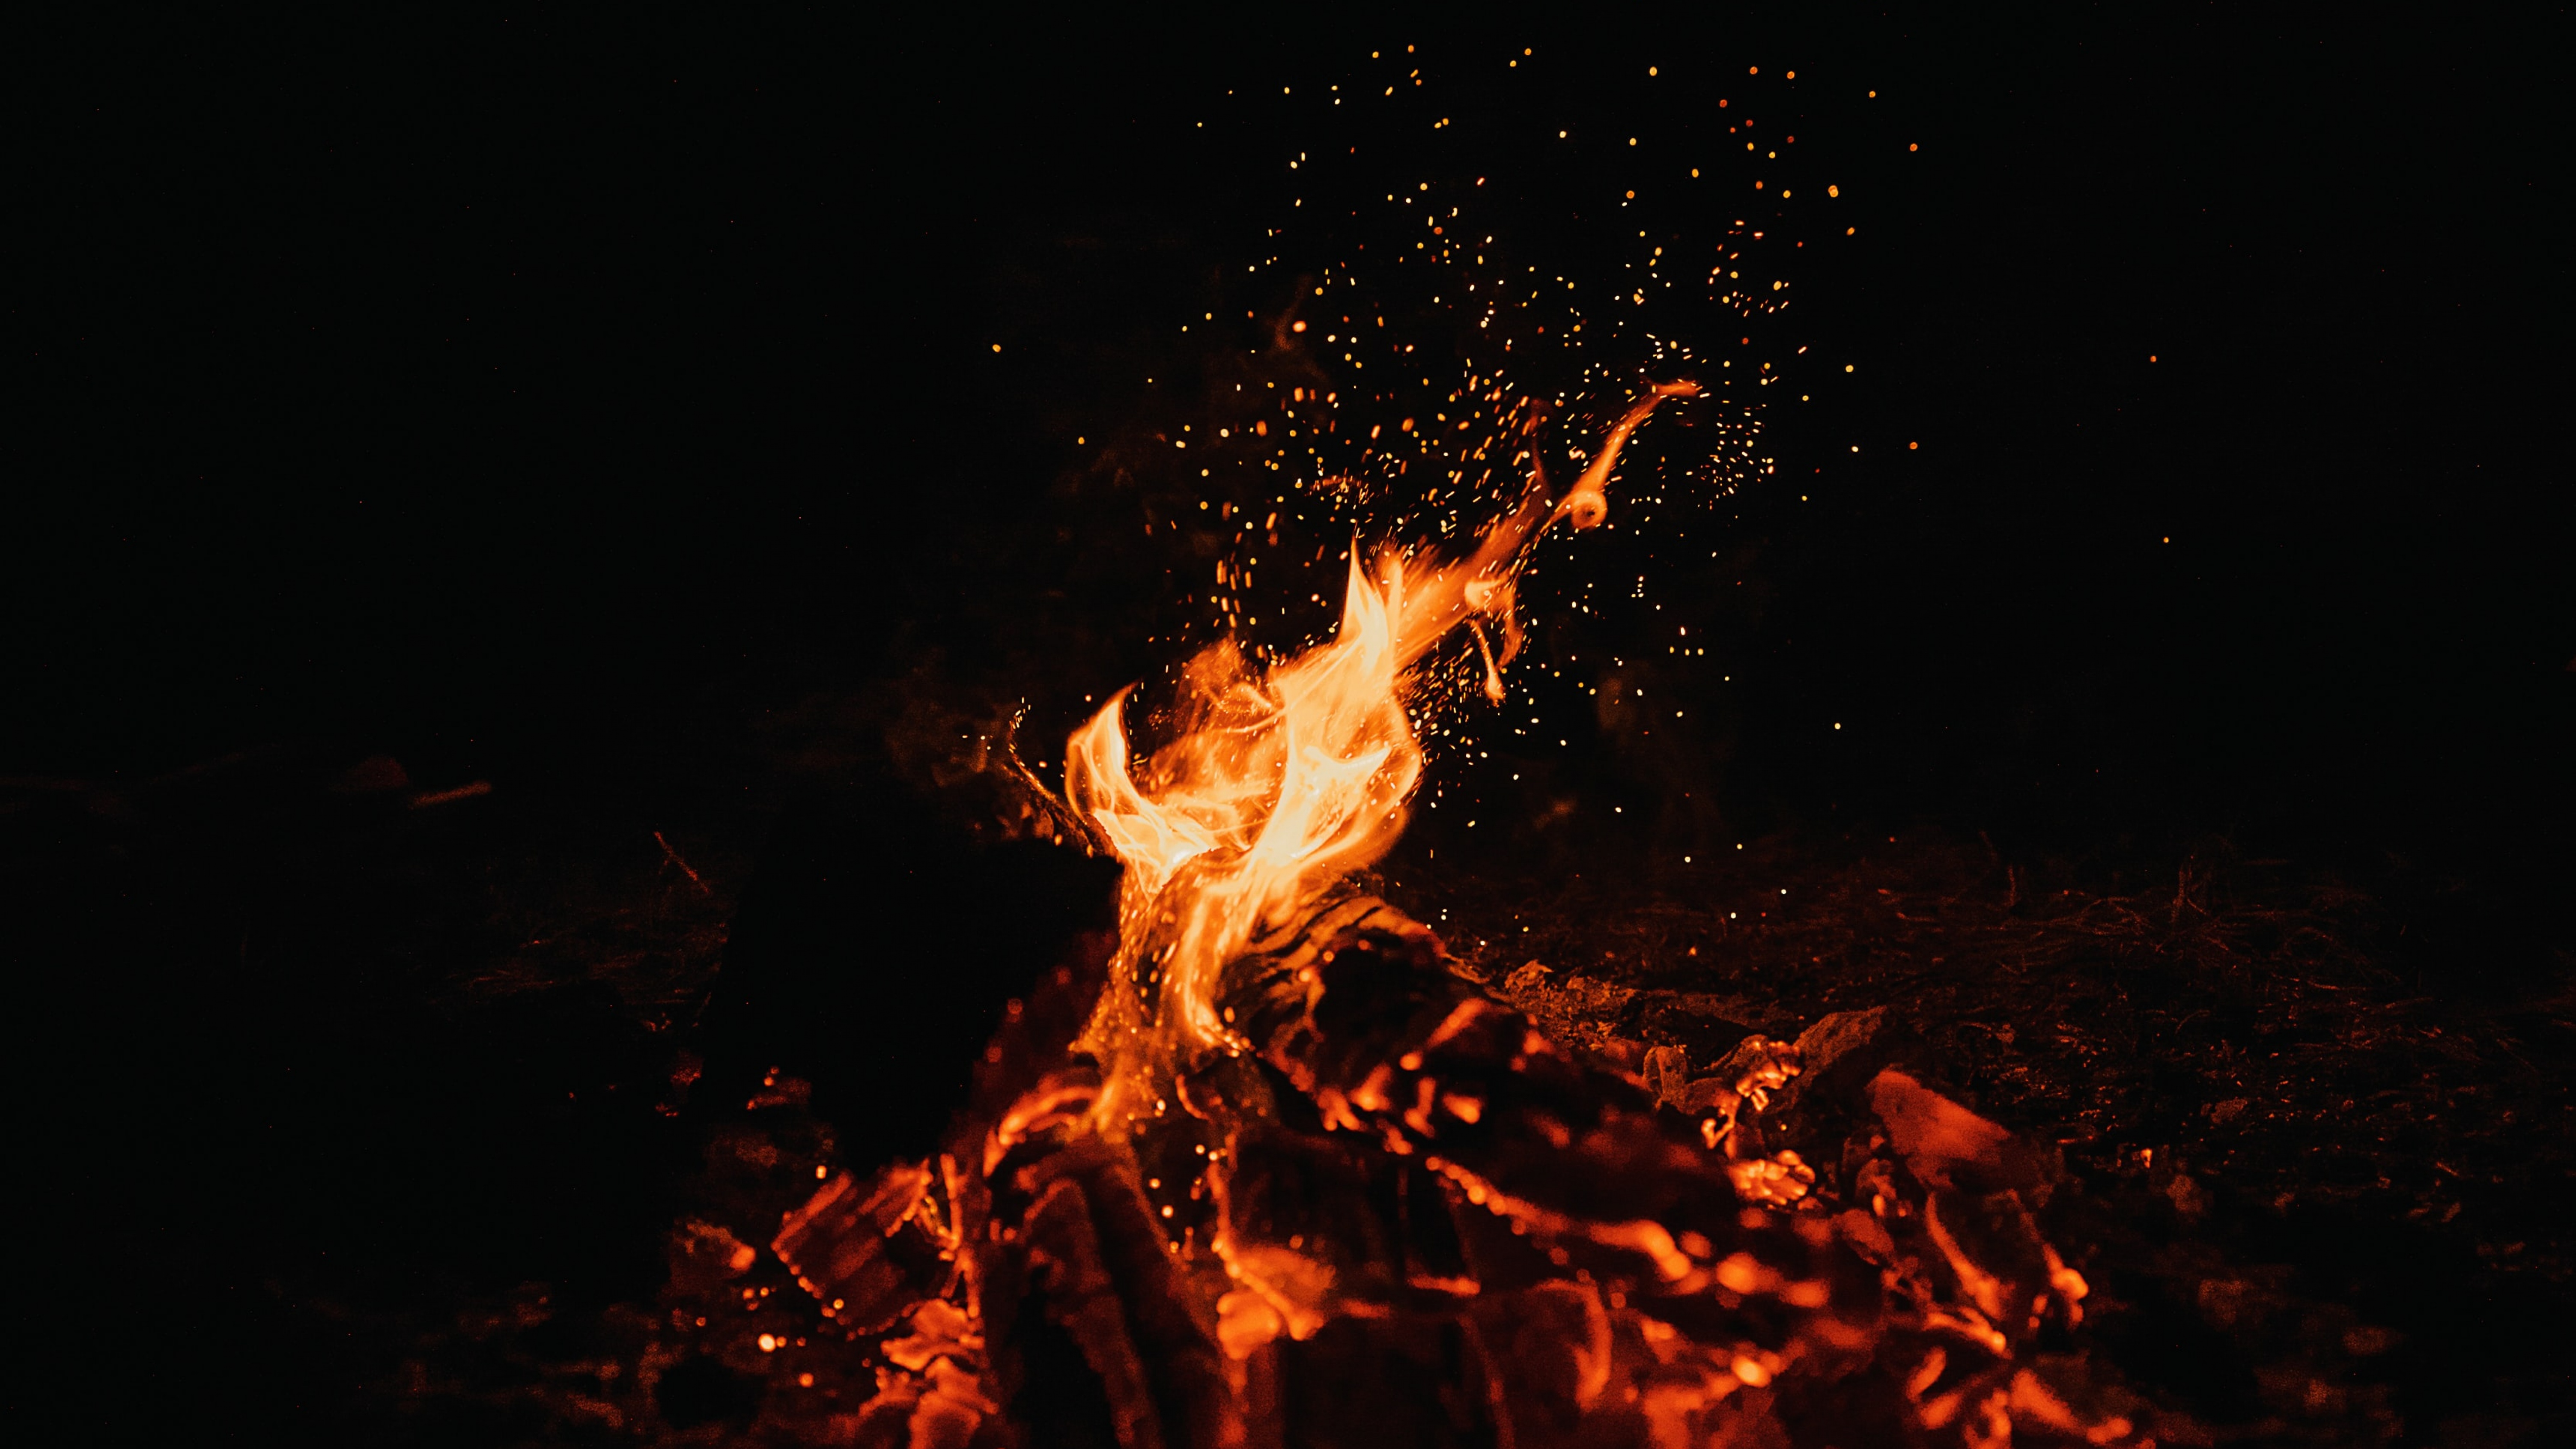 1,000+ Free Black Fire & Fire Images - Pixabay